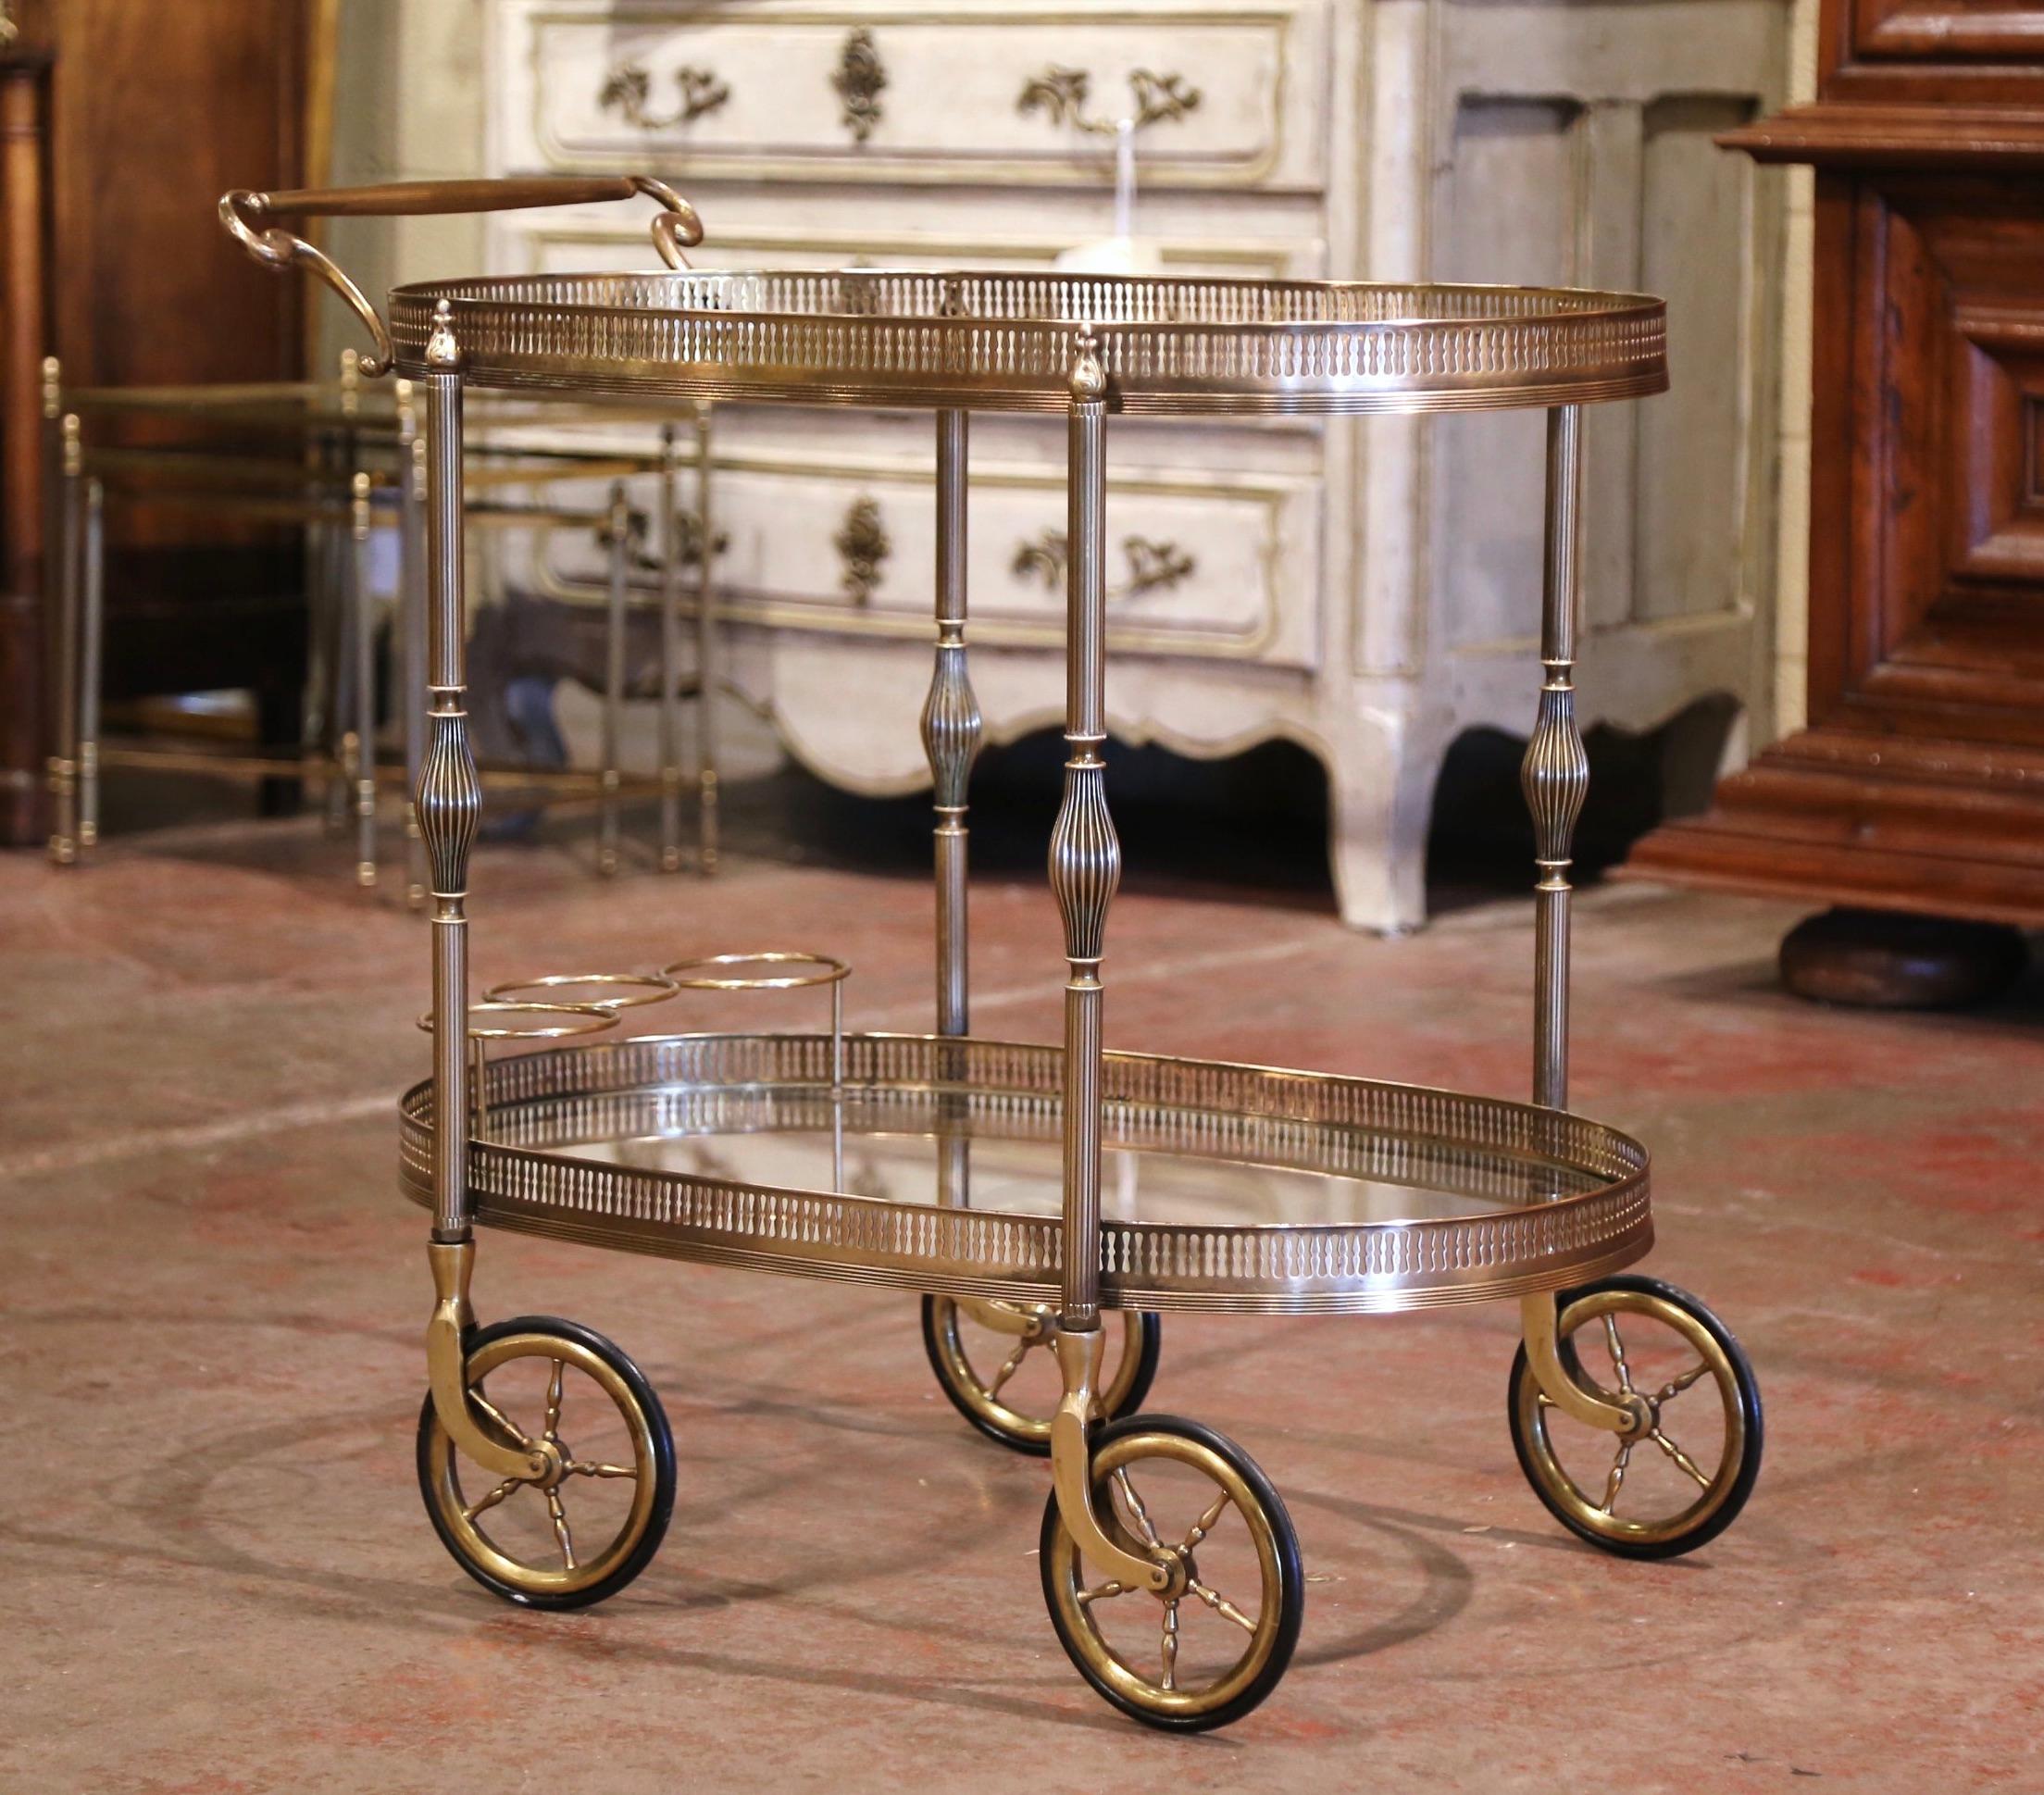 This beautiful, vintage rolling bar cart was created in France, circa 1930. Oval in shape and built of brass, the two-tier dessert table stands on four straight legs with top finials, decorated in the middle, and finished with small round wheels